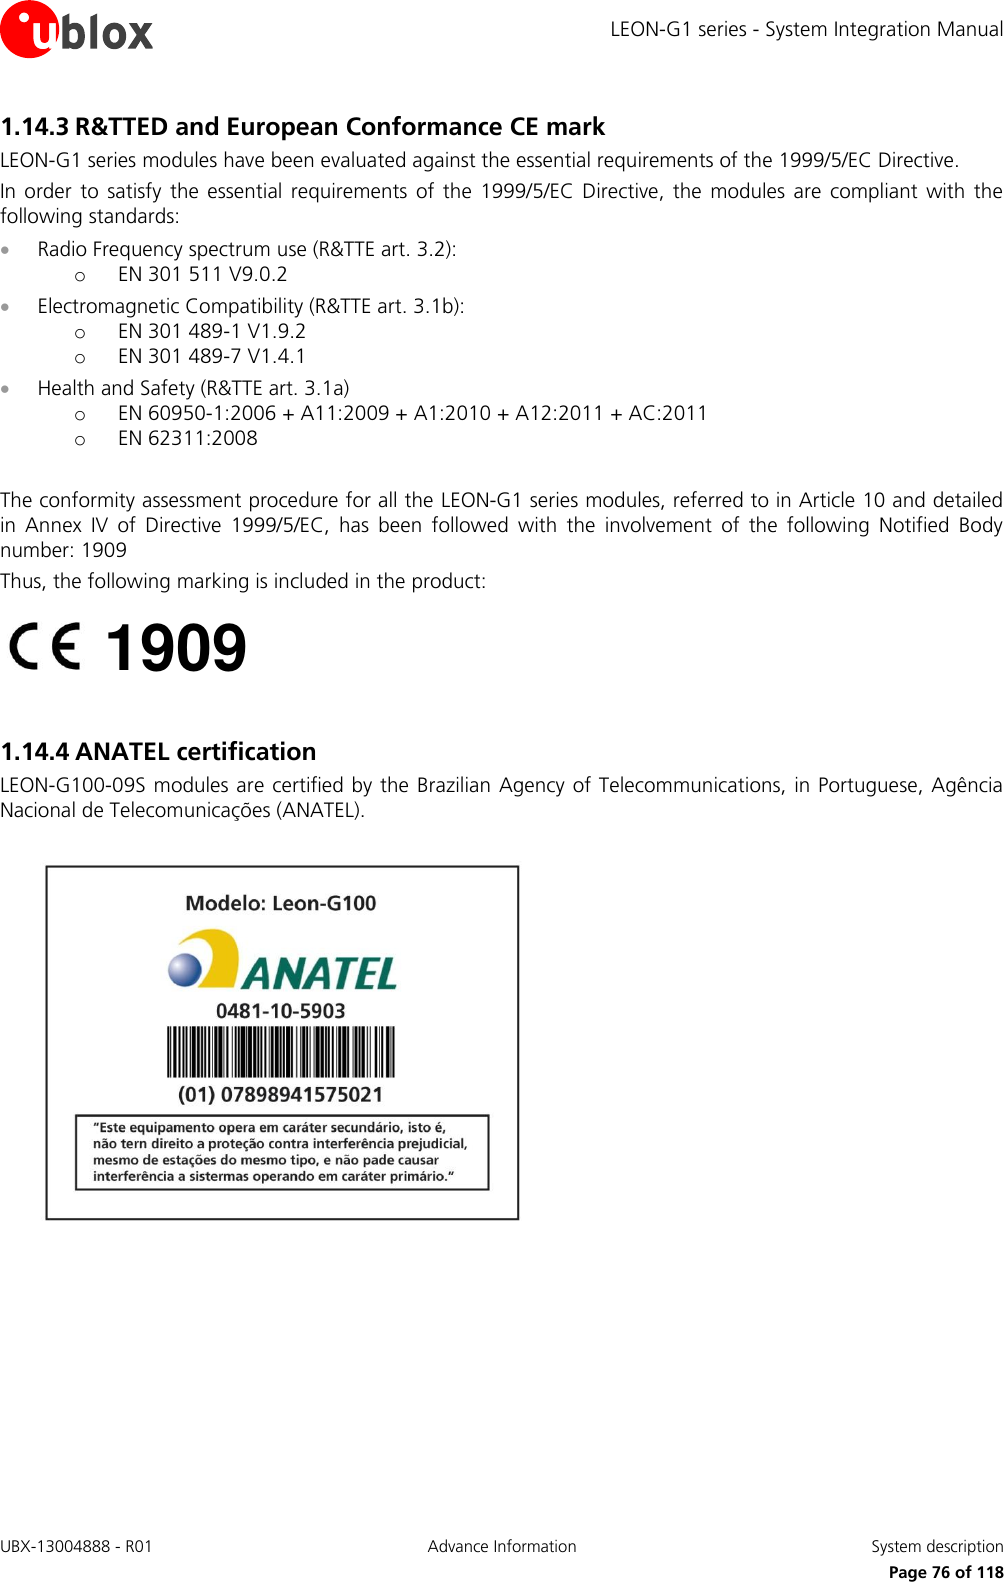 LEON-G1 series - System Integration Manual UBX-13004888 - R01  Advance Information  System description      Page 76 of 118 1.14.3 R&amp;TTED and European Conformance CE mark LEON-G1 series modules have been evaluated against the essential requirements of the 1999/5/EC Directive. In order  to  satisfy  the  essential  requirements  of  the  1999/5/EC  Directive,  the  modules  are  compliant  with the following standards:  Radio Frequency spectrum use (R&amp;TTE art. 3.2): o EN 301 511 V9.0.2  Electromagnetic Compatibility (R&amp;TTE art. 3.1b): o EN 301 489-1 V1.9.2 o EN 301 489-7 V1.4.1  Health and Safety (R&amp;TTE art. 3.1a) o EN 60950-1:2006 + A11:2009 + A1:2010 + A12:2011 + AC:2011 o EN 62311:2008  The conformity assessment procedure for all the LEON-G1 series modules, referred to in Article 10 and detailed in  Annex  IV  of  Directive  1999/5/EC,  has  been  followed  with  the  involvement  of  the  following  Notified  Body number: 1909 Thus, the following marking is included in the product:   1.14.4 ANATEL certification LEON-G100-09S modules are certified by the Brazilian  Agency of Telecommunications, in Portuguese, Agência Nacional de Telecomunicações (ANATEL).    1909 